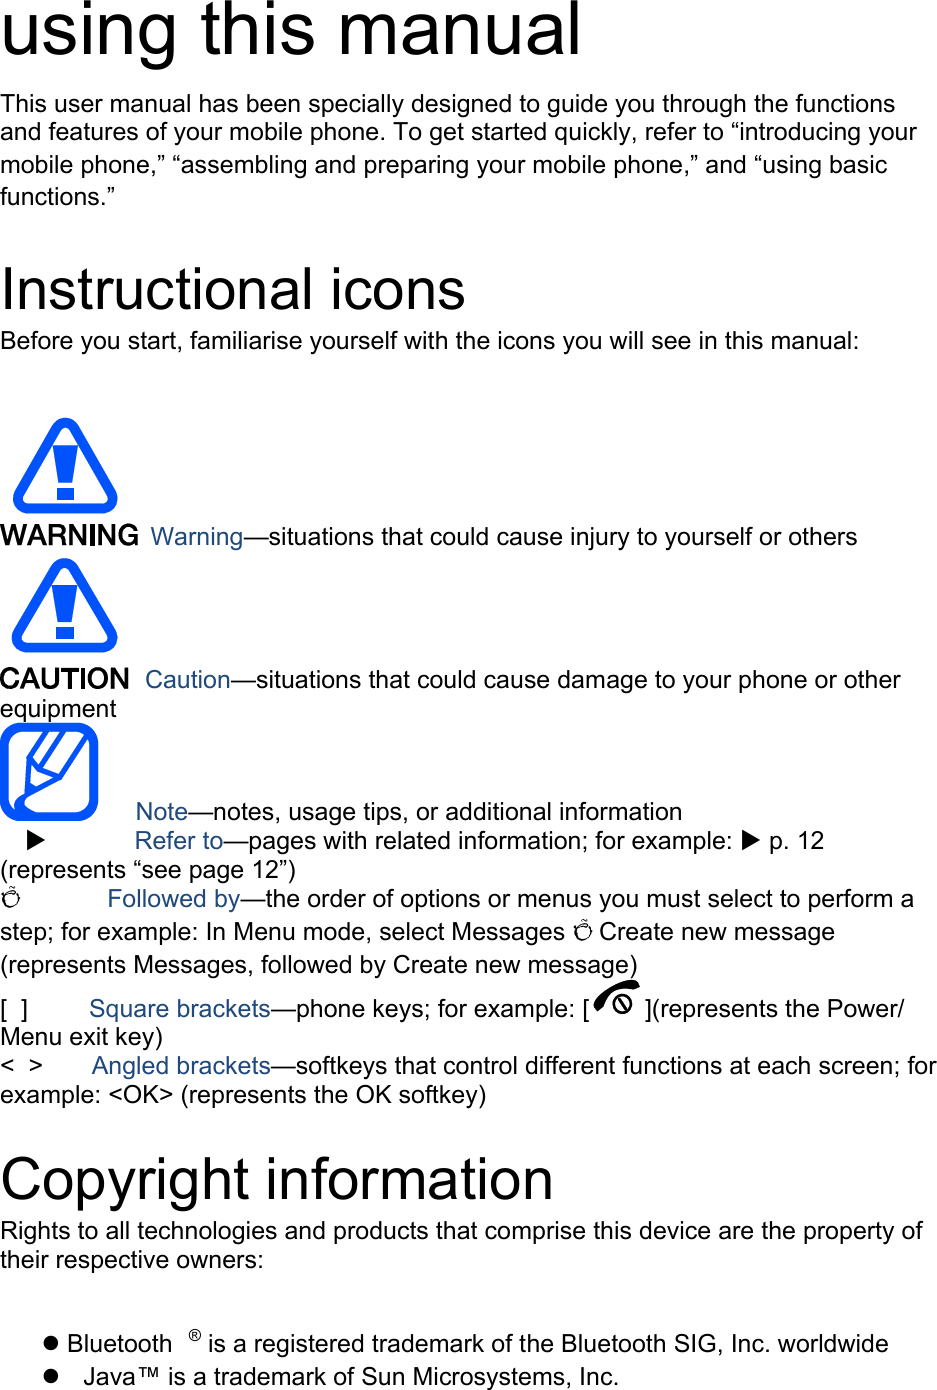 using this manual This user manual has been specially designed to guide you through the functions and features of your mobile phone. To get started quickly, refer to “introducing your mobile phone,” “assembling and preparing your mobile phone,” and “using basic functions.”  Instructional icons Before you start, familiarise yourself with the icons you will see in this manual:     Warning—situations that could cause injury to yourself or others  Caution—situations that could cause damage to your phone or other equipment    Note—notes, usage tips, or additional information          Refer to—pages with related information; for example:  p. 12 (represents “see page 12”) Õ       Followed by—the order of options or menus you must select to perform a step; for example: In Menu mode, select Messages Õ Create new message (represents Messages, followed by Create new message) [  ]     Square brackets—phone keys; for example: [ ](represents the Power/ Menu exit key) &lt;  &gt;    Angled brackets—softkeys that control different functions at each screen; for example: &lt;OK&gt; (represents the OK softkey)  Copyright information Rights to all technologies and products that comprise this device are the property of their respective owners:  ® Bluetooth  is a registered trademark of the Bluetooth SIG, Inc. worldwide   Java™ is a trademark of Sun Microsystems, Inc. 